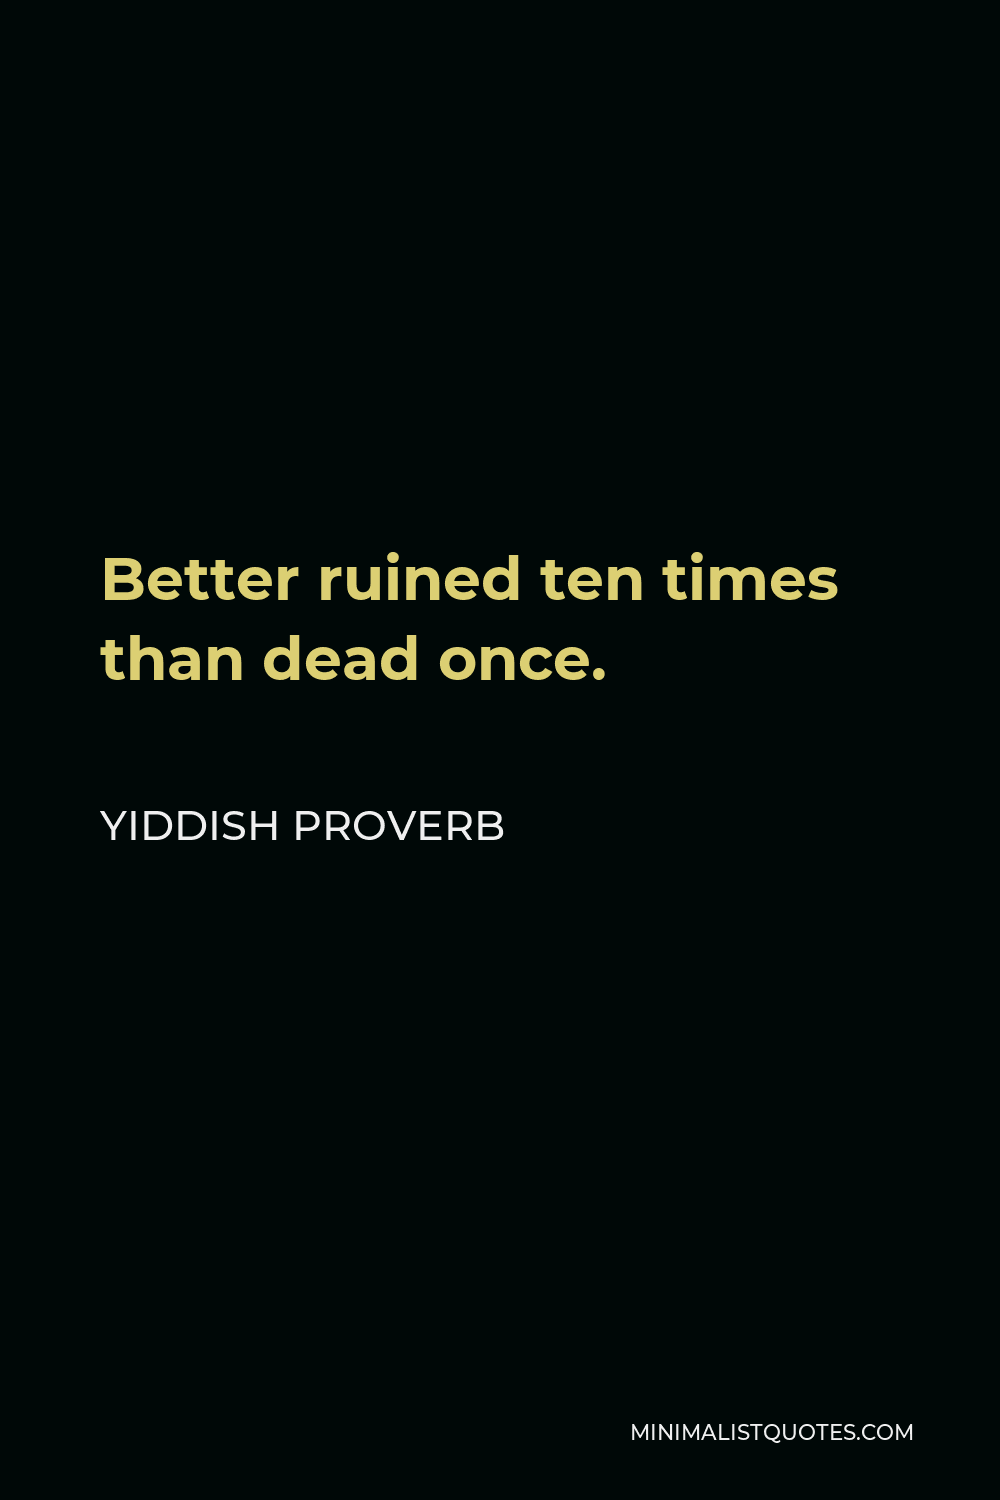 Yiddish Proverb Quote - Better ruined ten times than dead once.